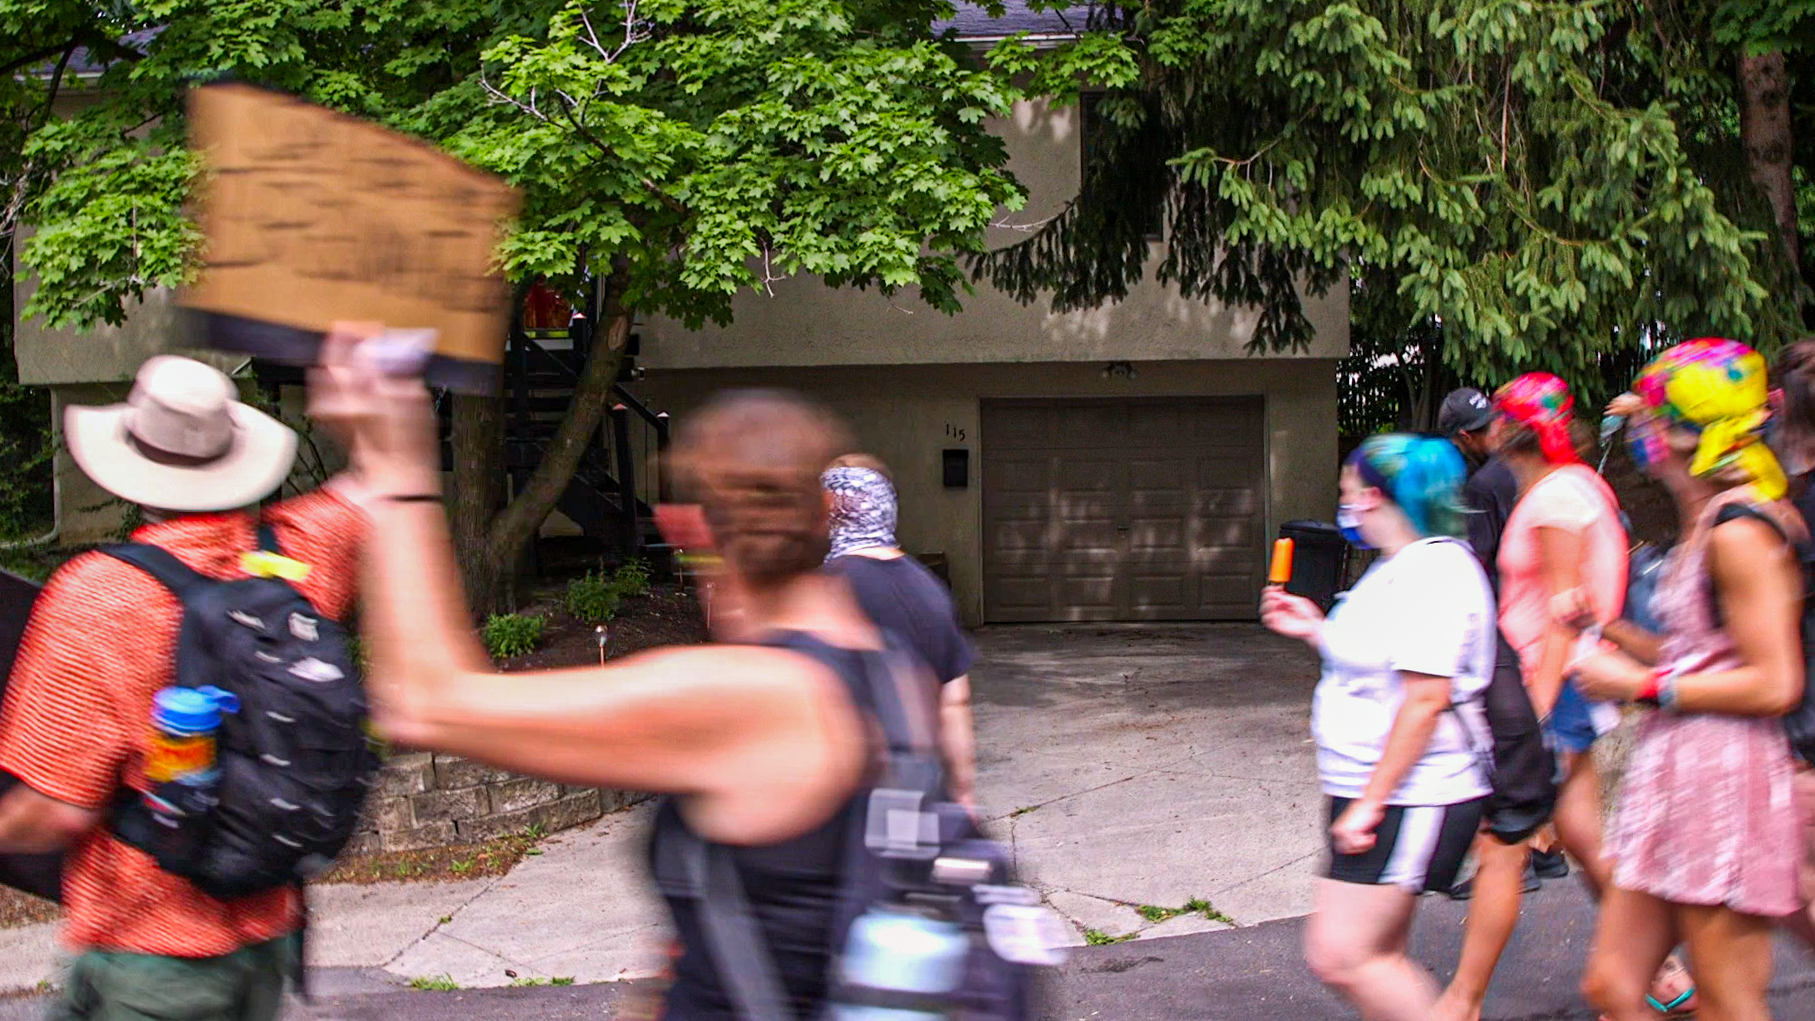 Protesters march by Mayor Ben Walsh's home in the Strathmore Neighborhood Friday, July 10, 2020 for the last day of the 40 + day and night peace march against police brutality and the death of George Floyd.